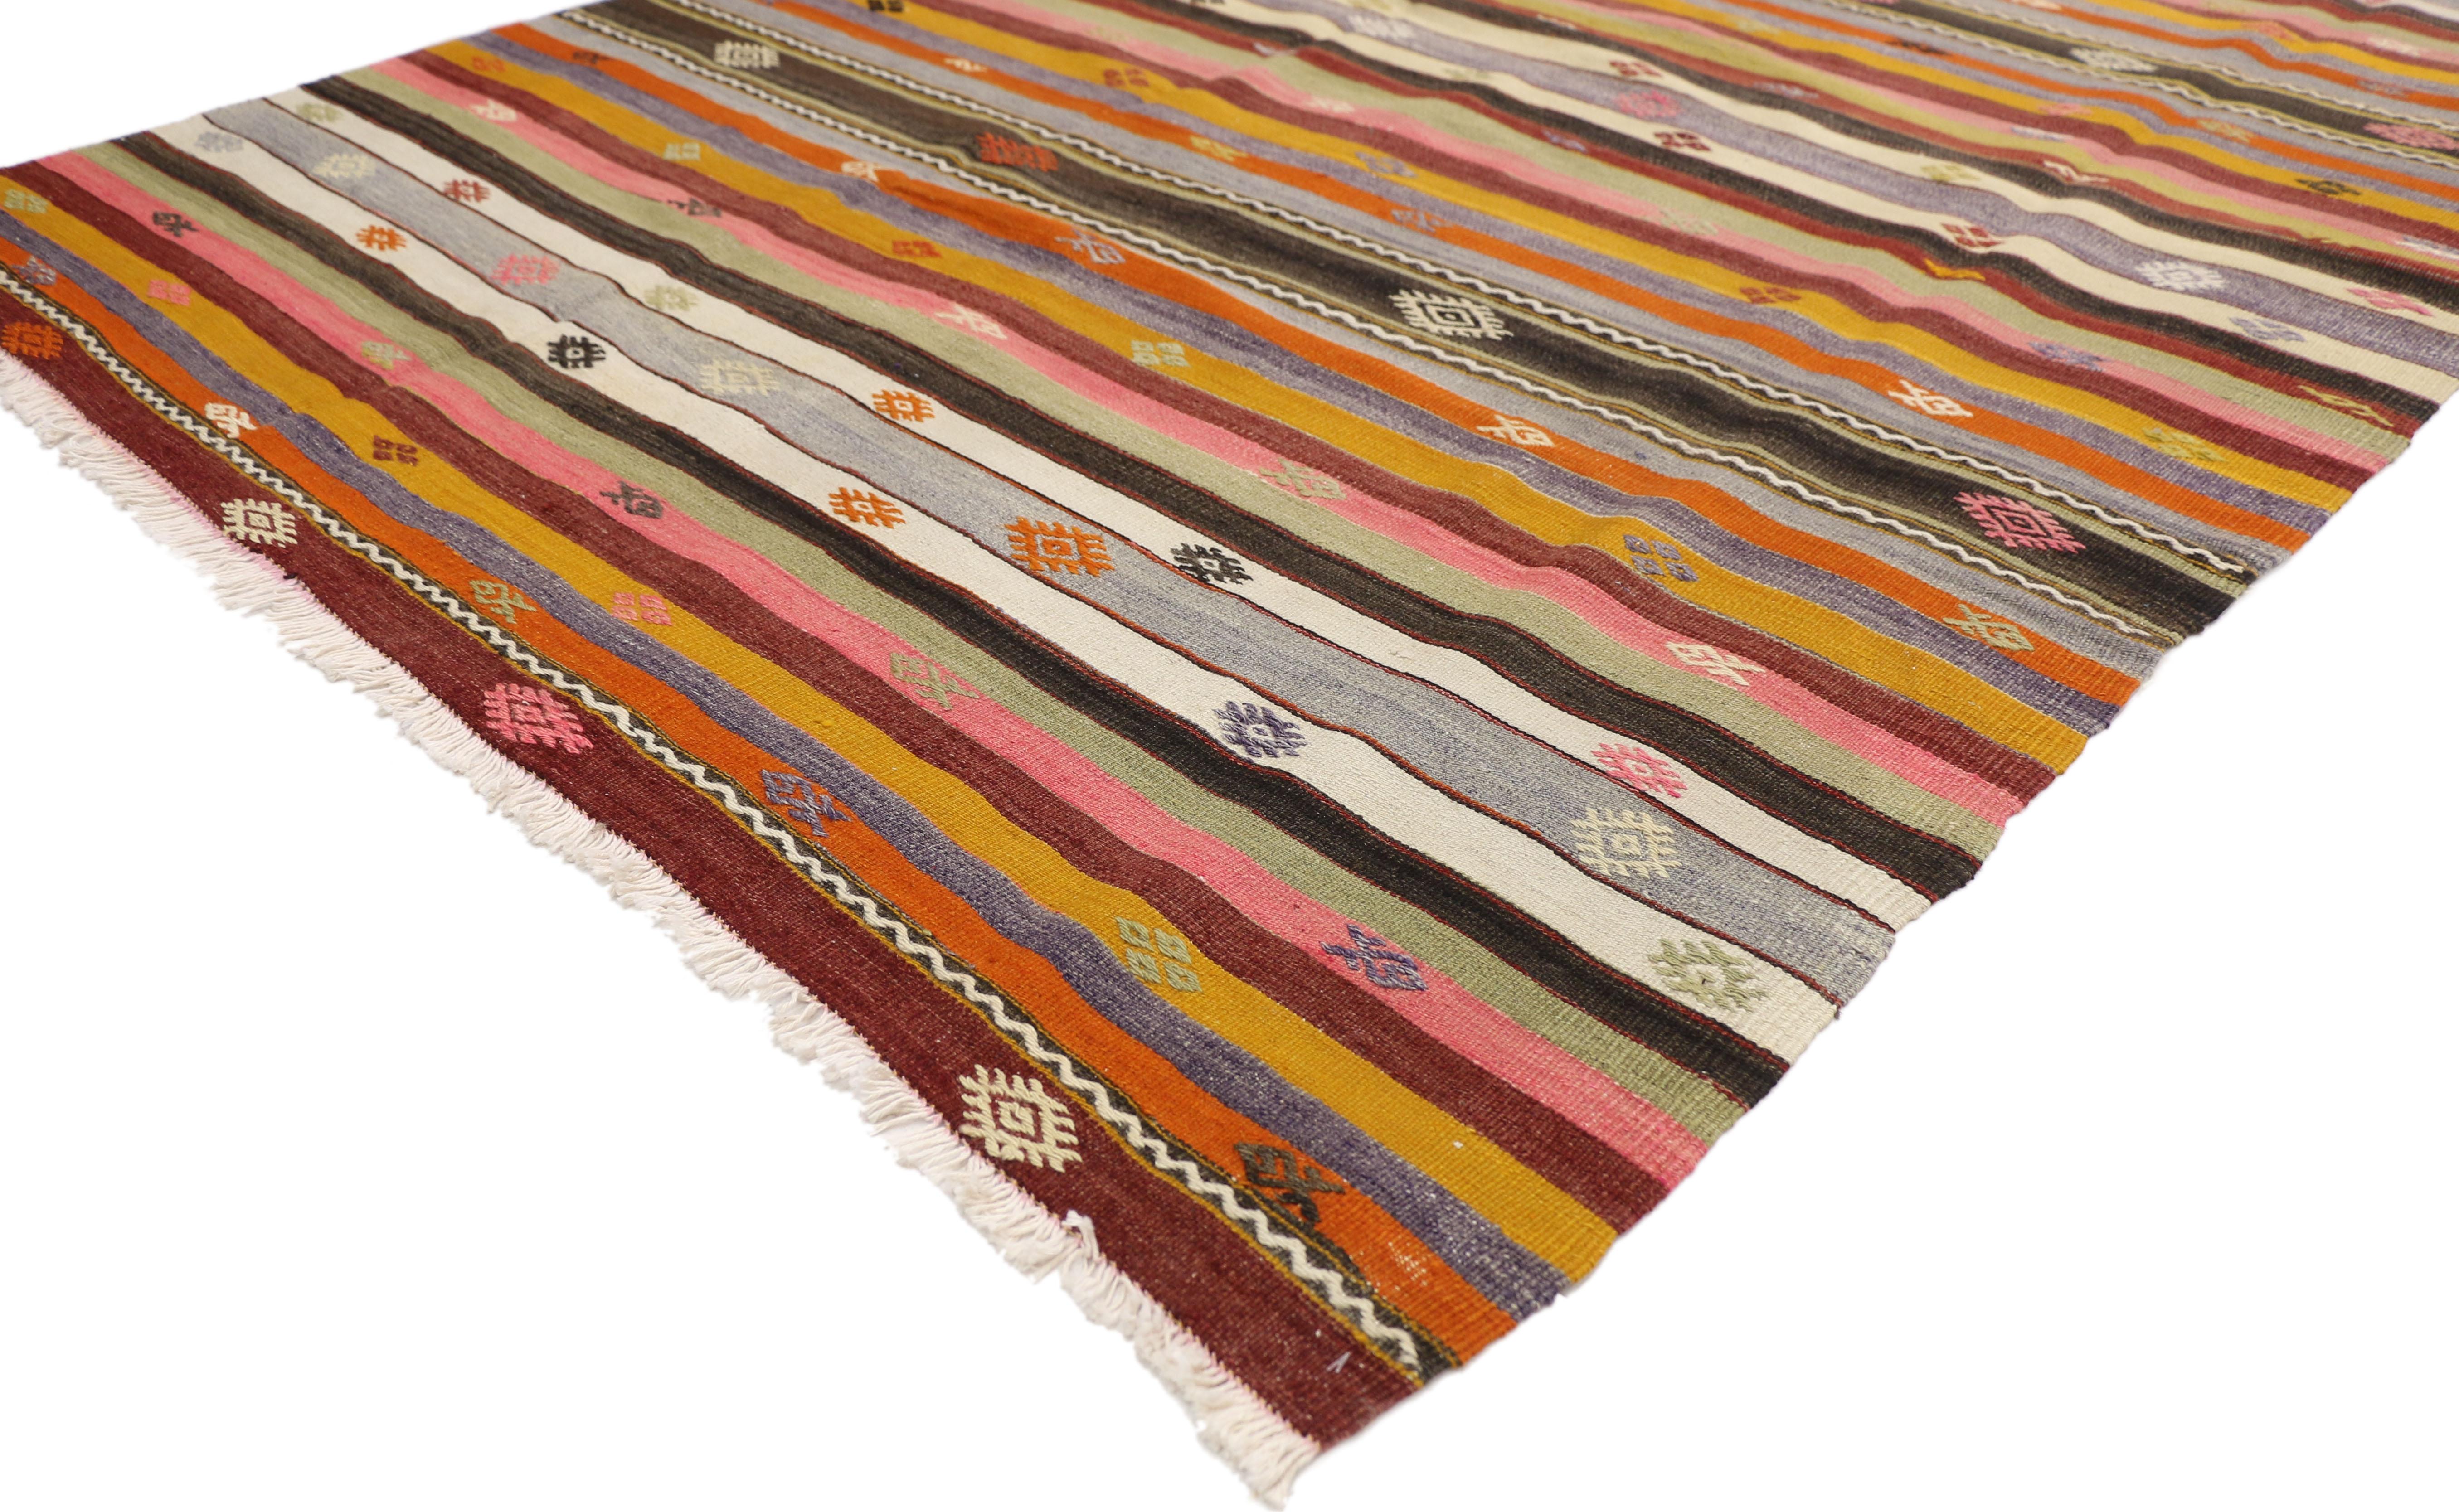 51283, vintage Turkish Kilim rug with tribal style boho chic flat-weave Kilim rug. This handwoven wool vintage Turkish Kilim rug features a series of stripes and bands with symbolic Turkish motifs. This flat-weave Kilim rug displays symbols of hook,